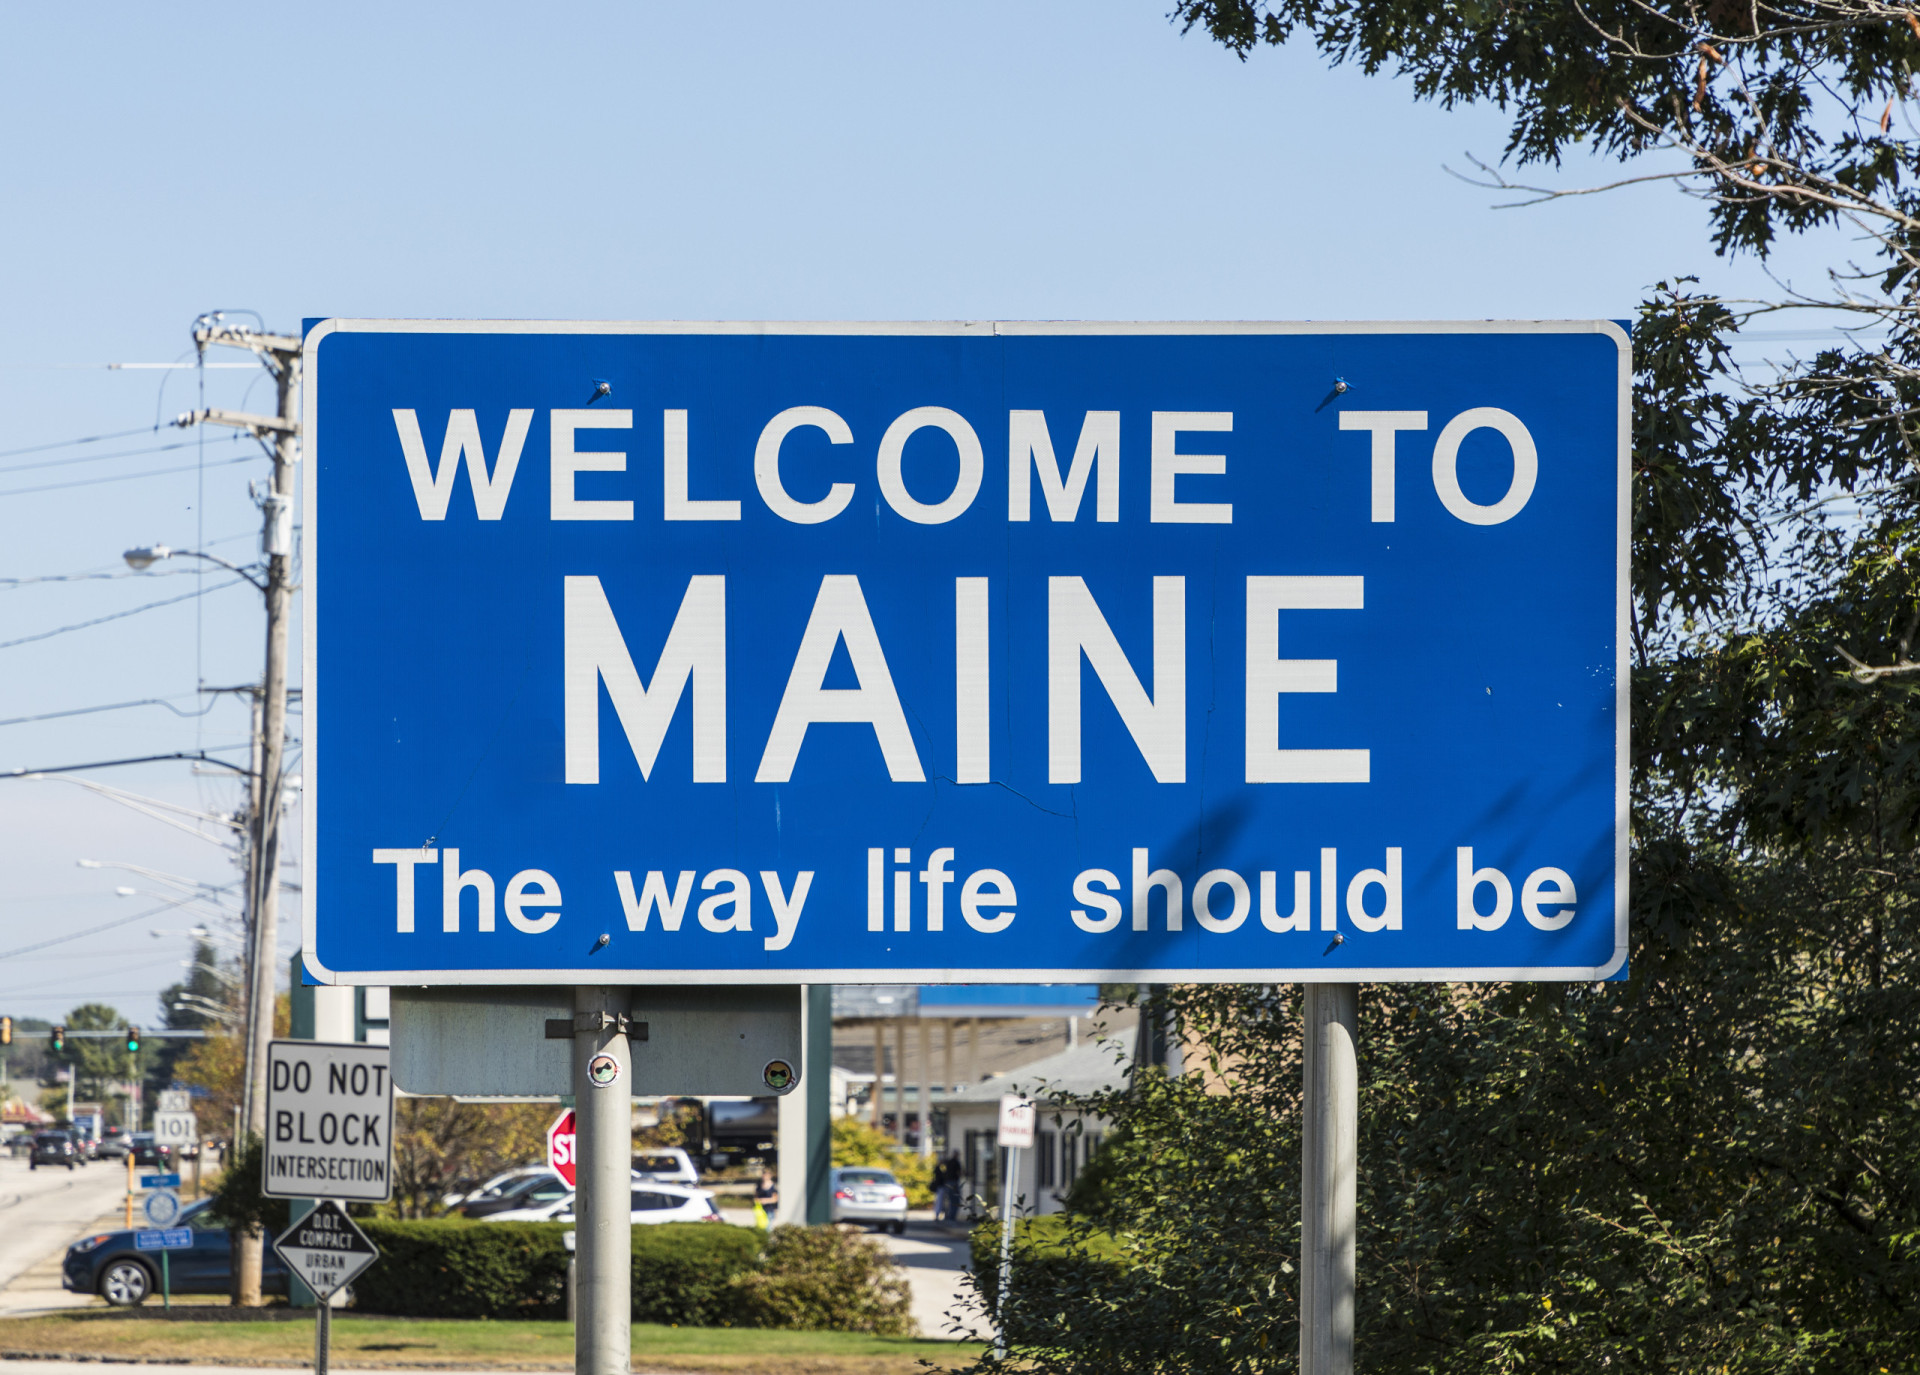 <p>The Pine Tree State is the go-to place for lobster. Maine's slogan used to be 'Vacationland.'</p><p><a href="https://www.msn.com/en-us/community/channel/vid-7xx8mnucu55yw63we9va2gwr7uihbxwc68fxqp25x6tg4ftibpra?cvid=94631541bc0f4f89bfd59158d696ad7e">Follow us and access great exclusive content every day</a></p>